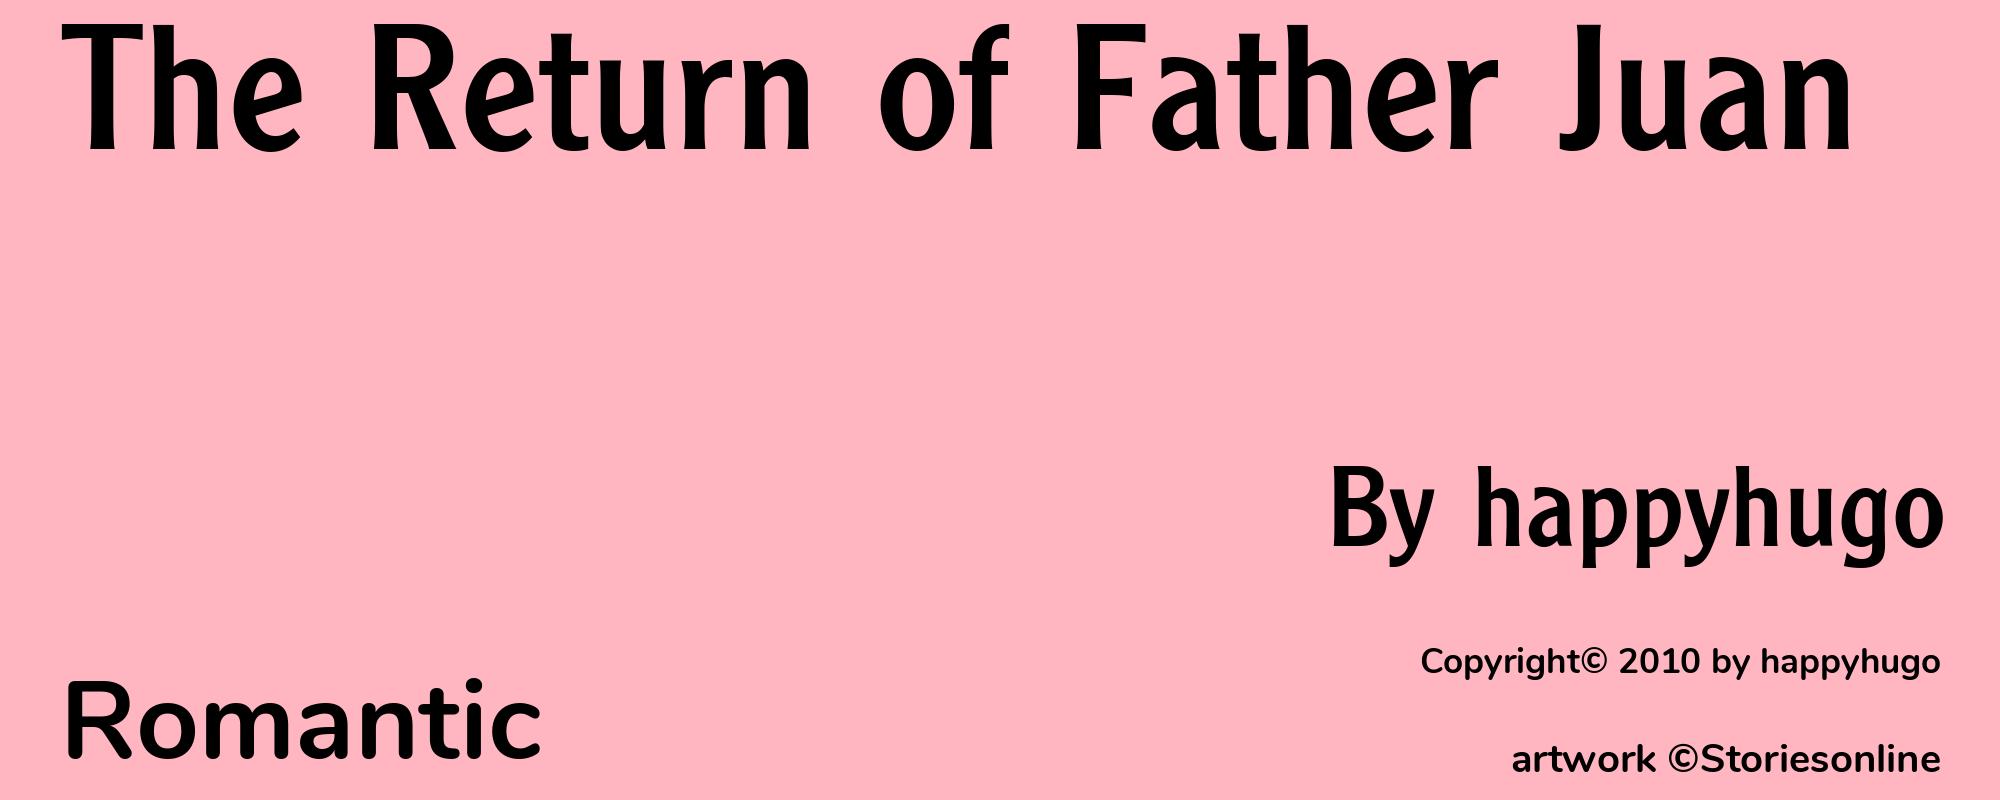 The Return of Father Juan - Cover